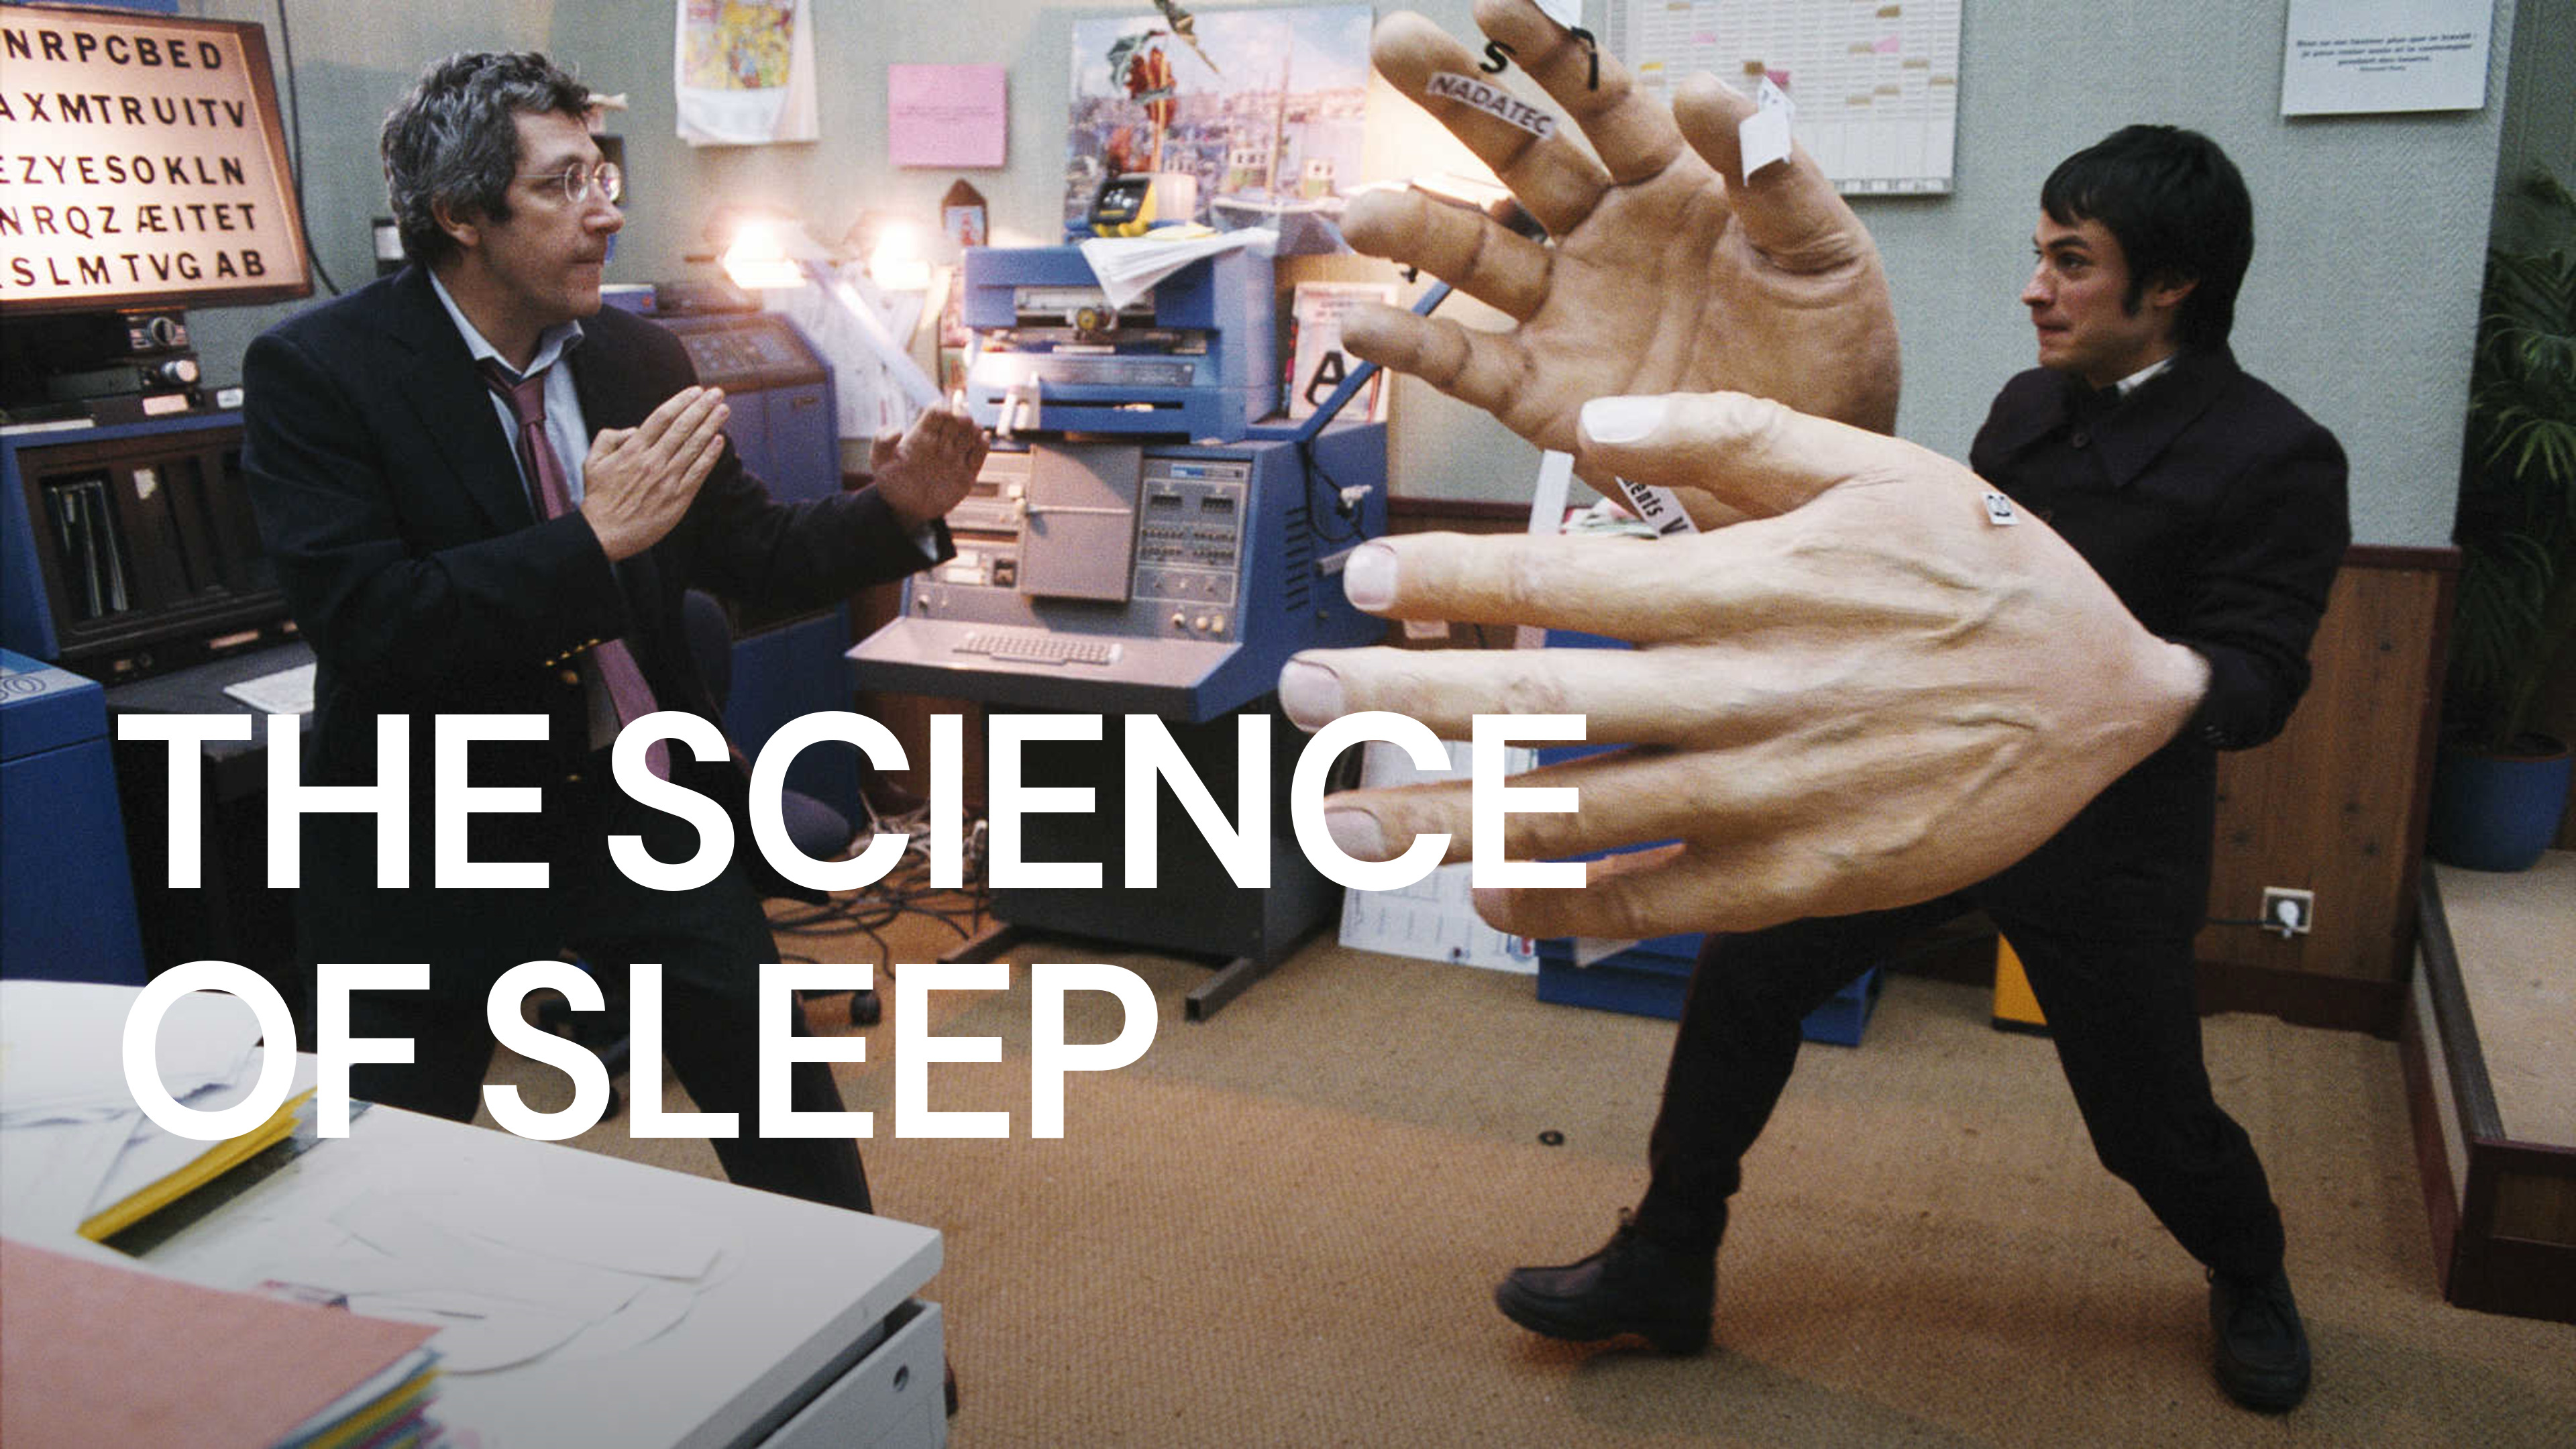 40-facts-about-the-movie-the-science-of-sleep